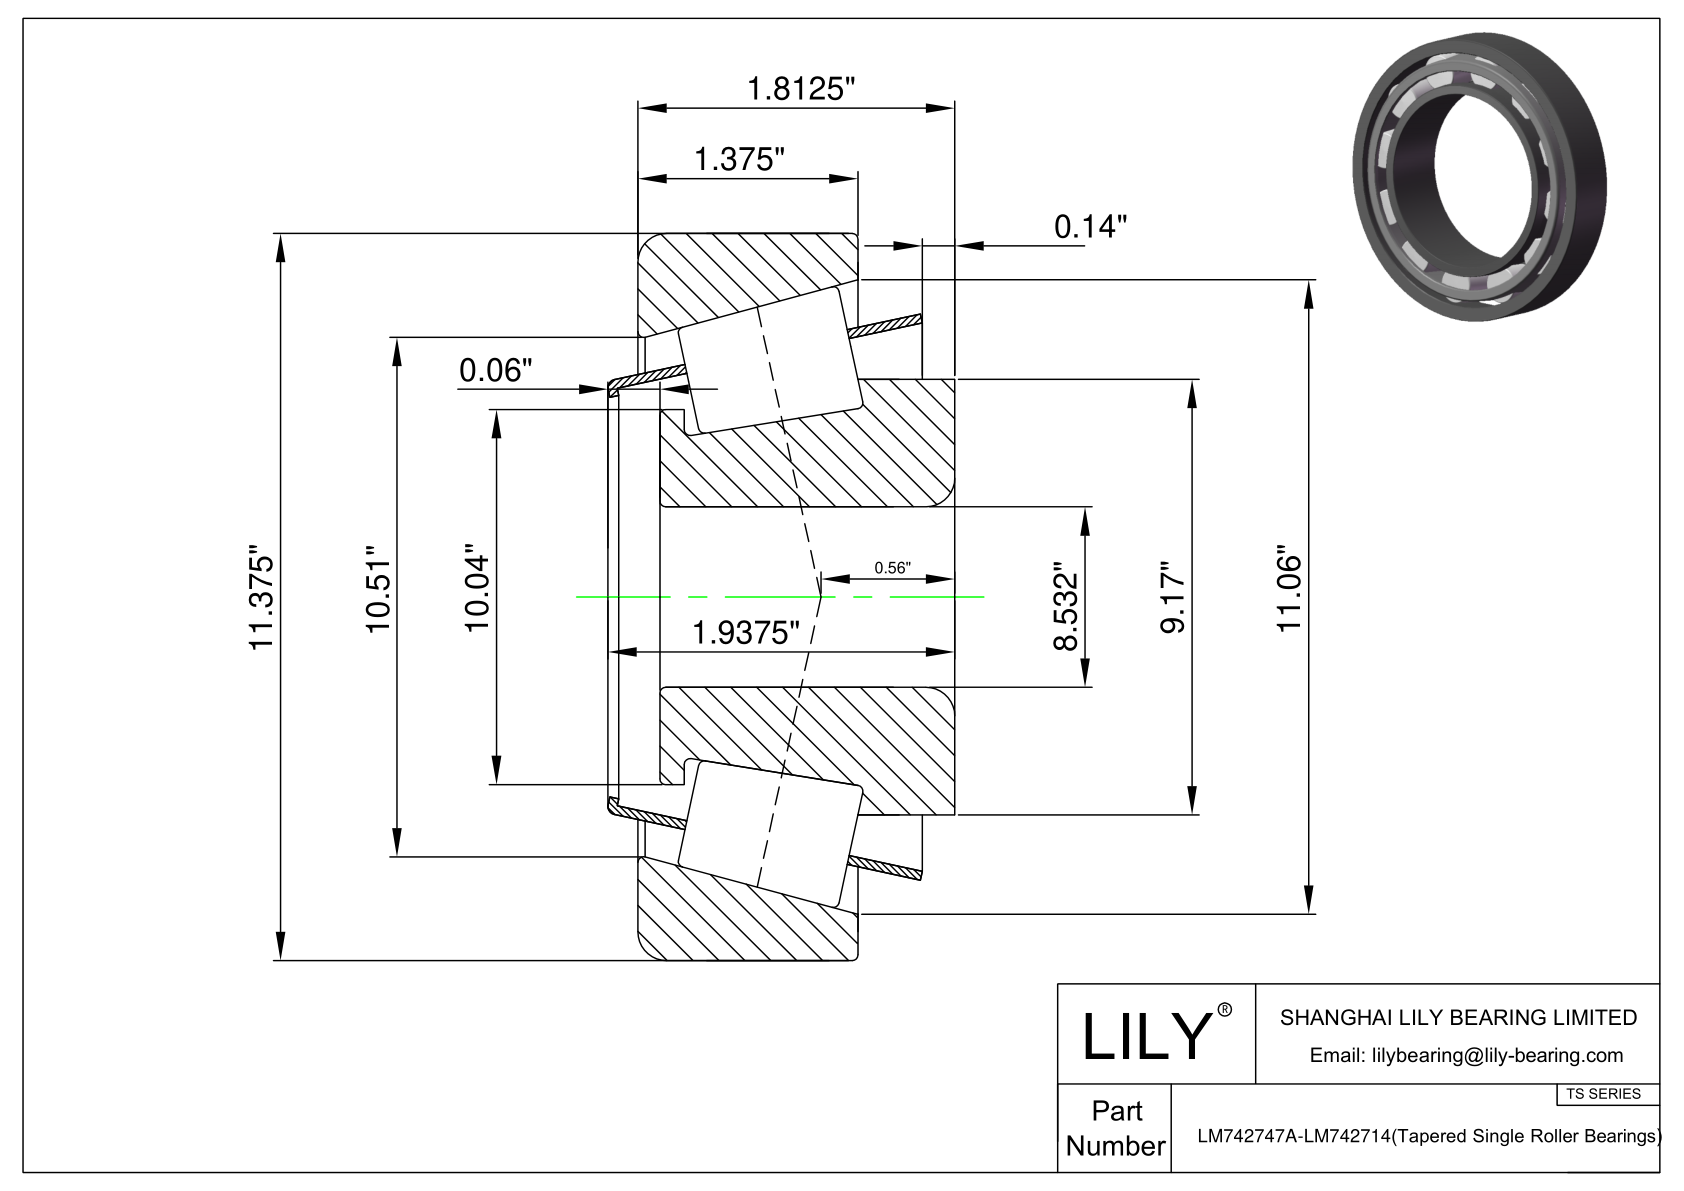 LM742747A-LM742714 TS (Tapered Single Roller Bearings) (Imperial) cad drawing